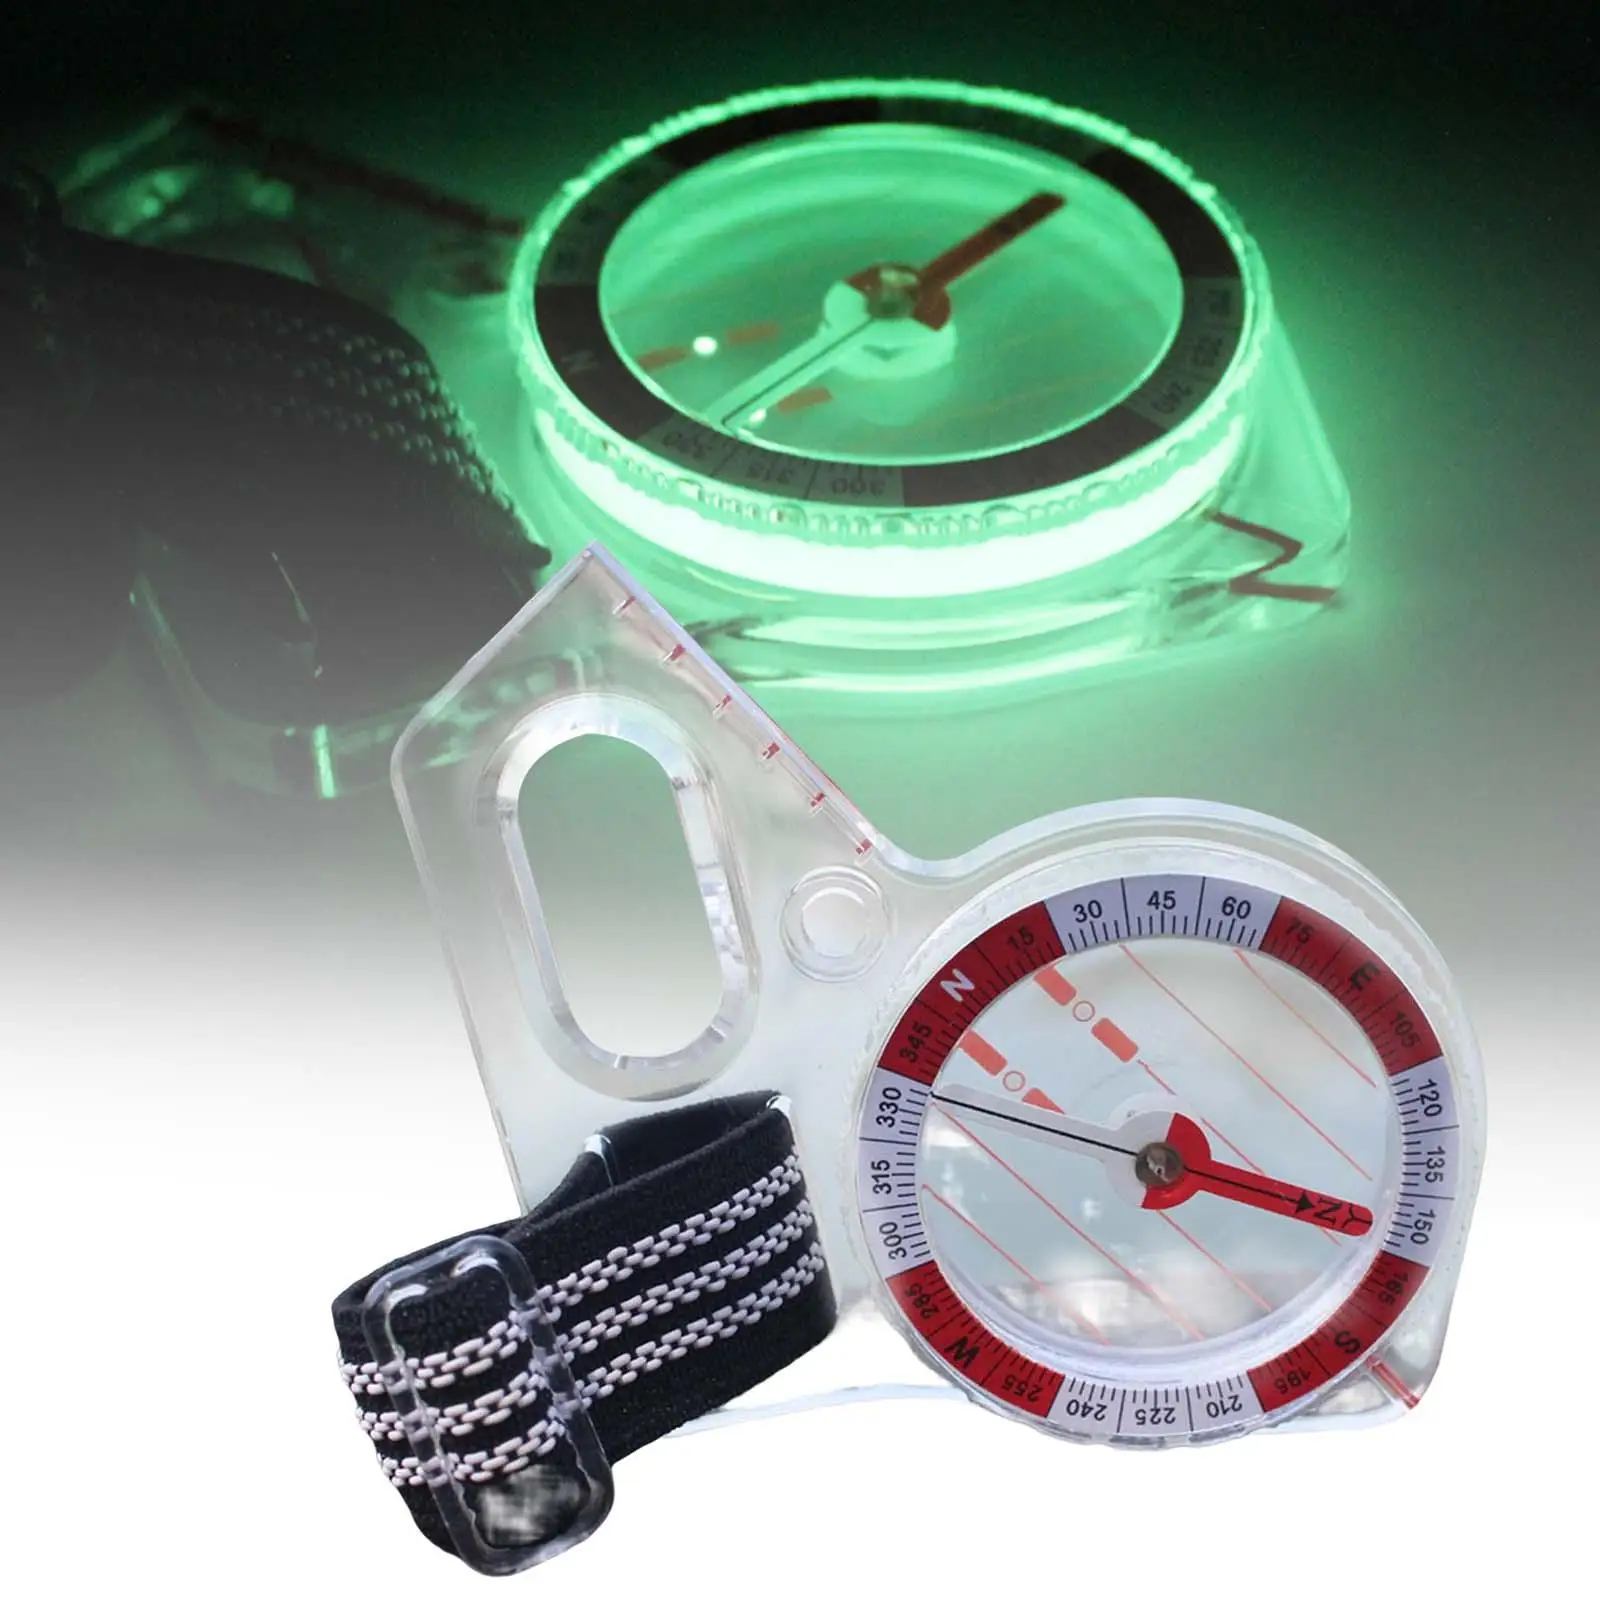 Compass Athletics Tournament Movement Compass for Training Hiking